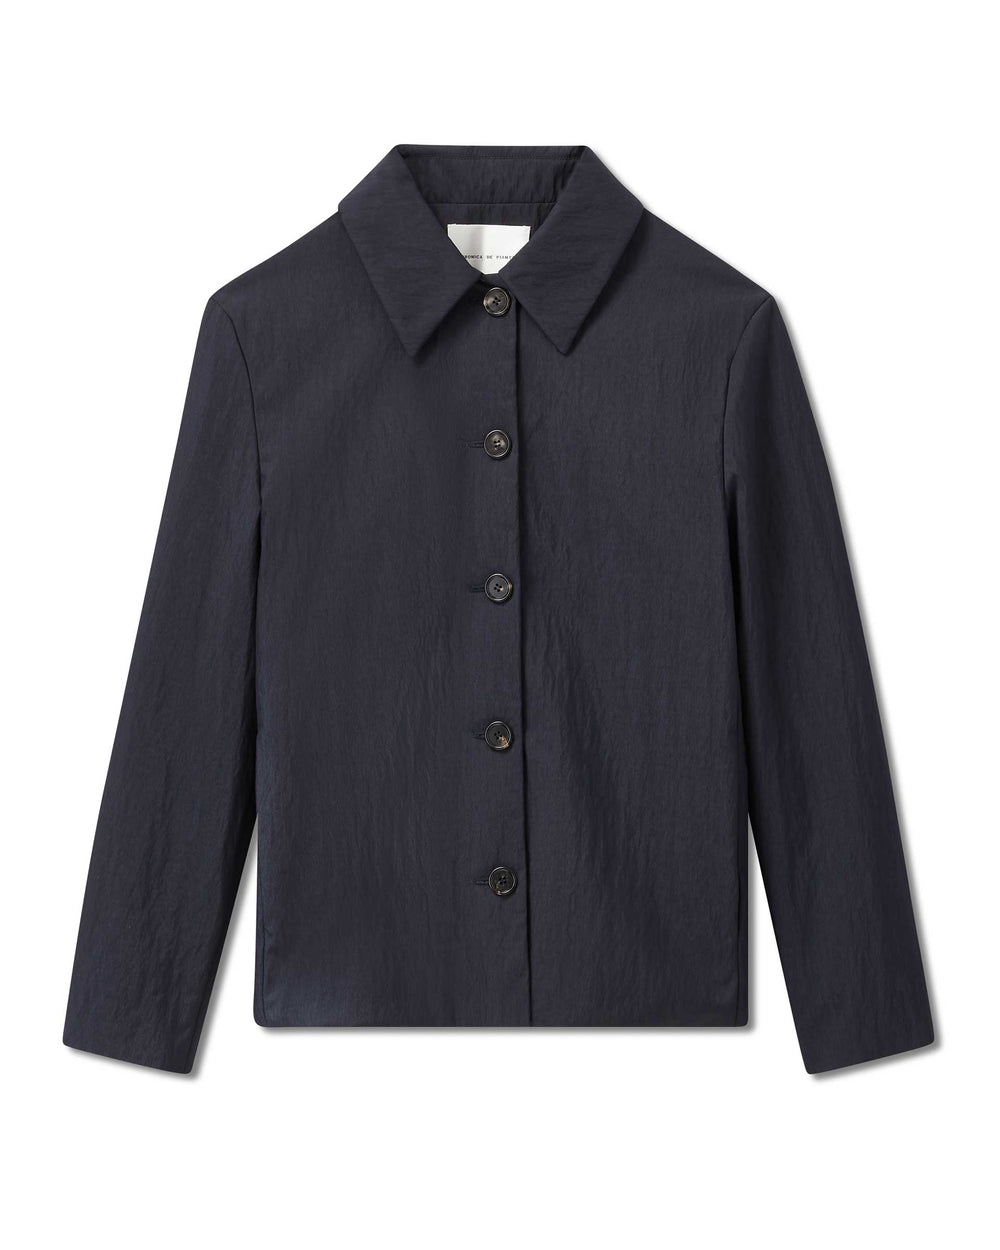 Sofia Jacket in Washed Twill Cavalry, Navy